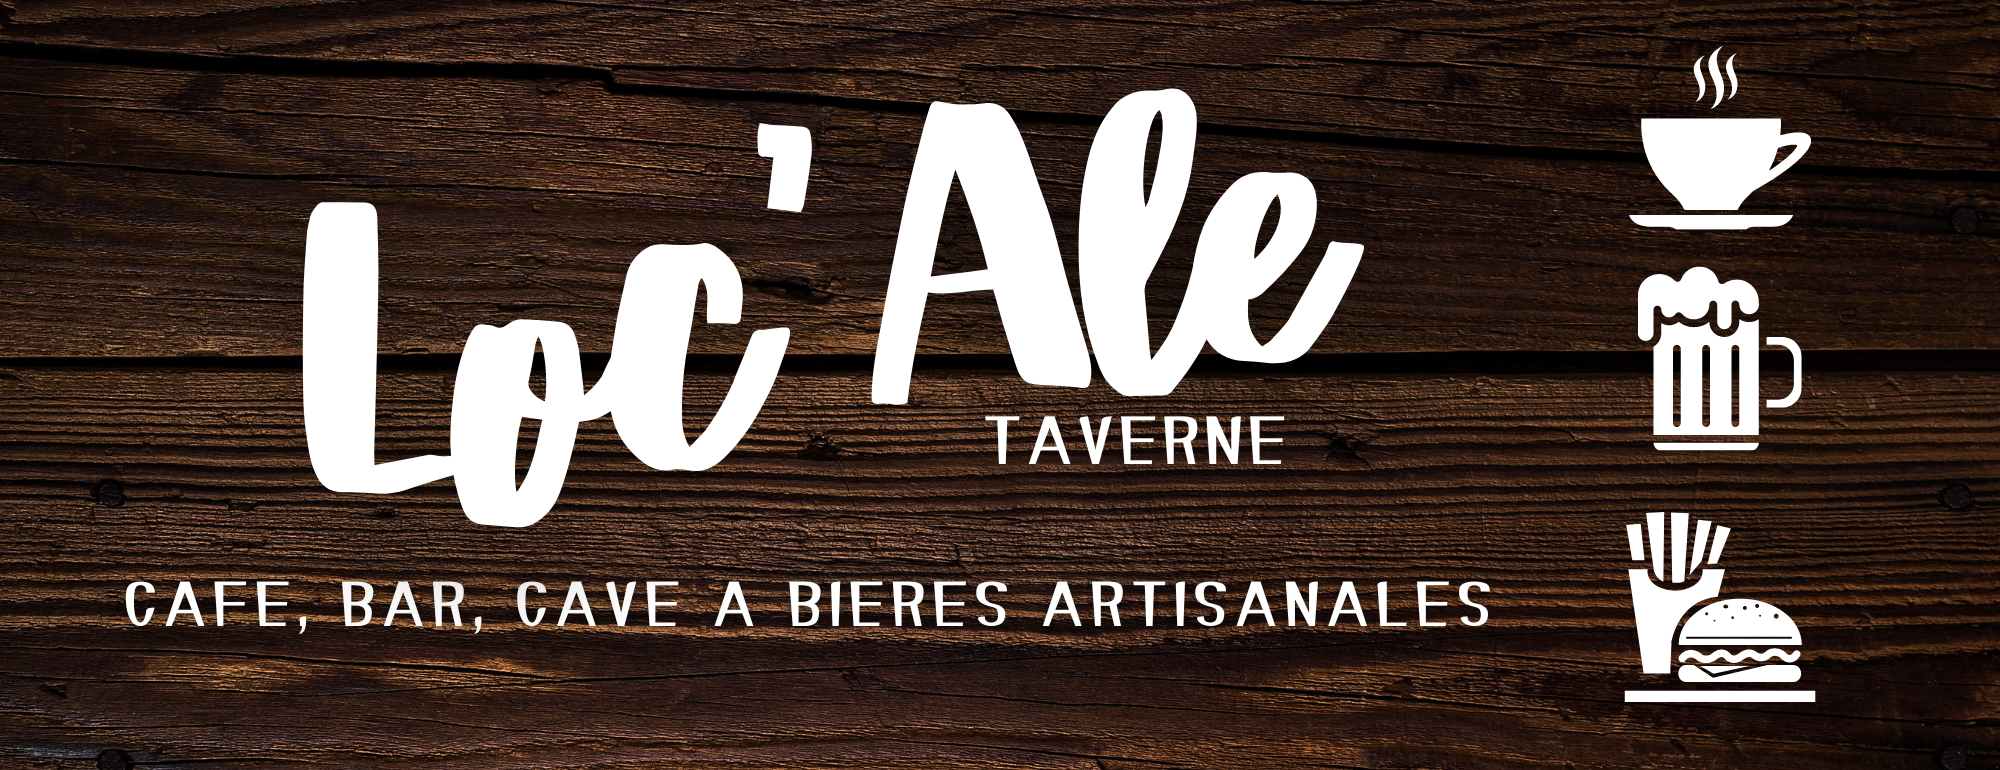 cafe bar cave a bieres artisanales 2000 x 770 px